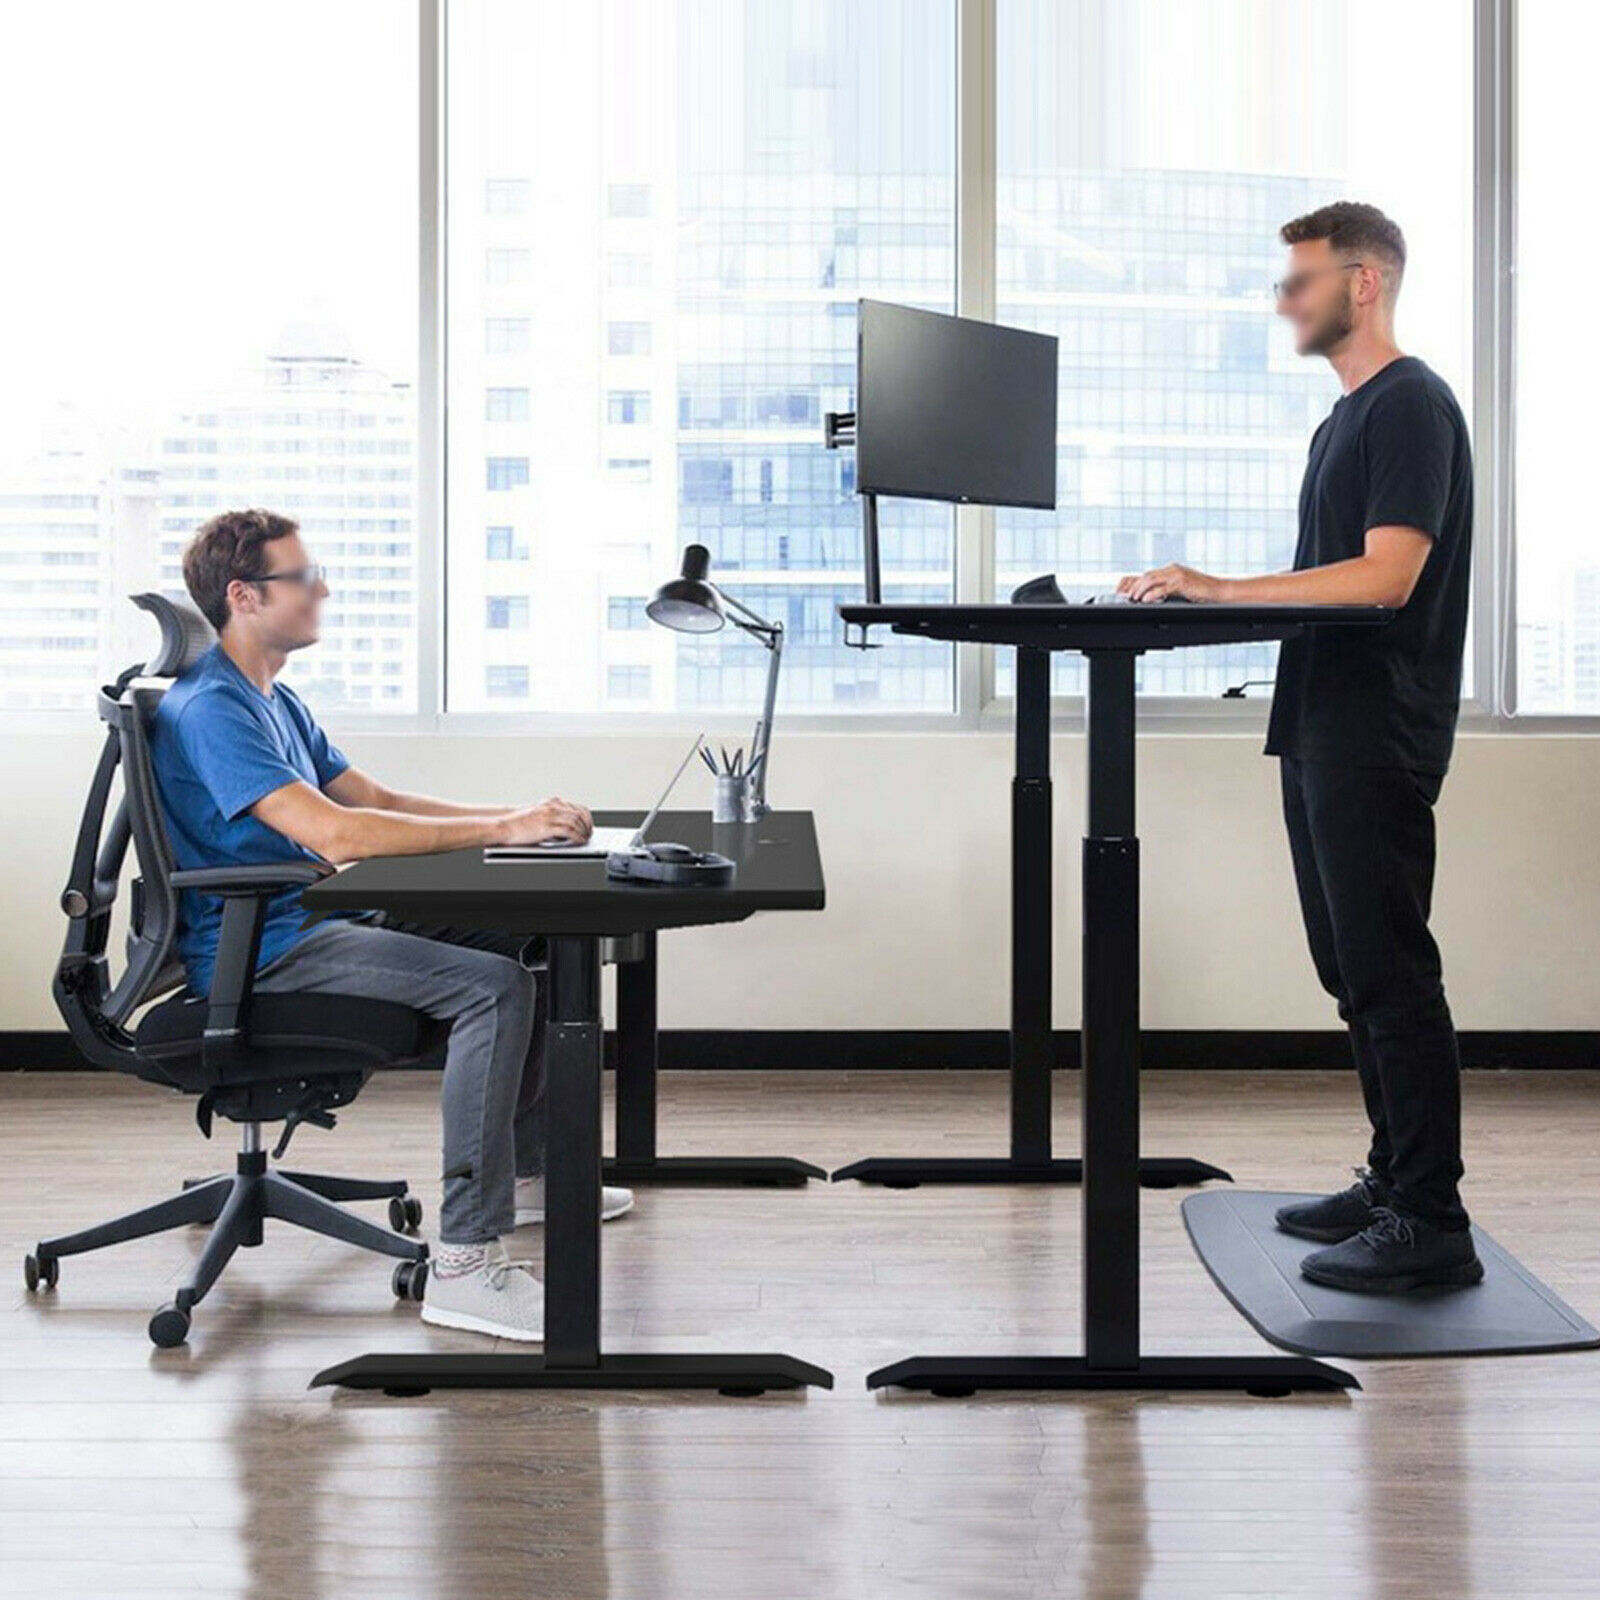 Ergonomic Electric Stand Up Gaming/Office Desk Frame with Adjustable Lifting Desk Top and Memory Control A standing desk can help boost your productivity by reducing fatigue and discomfort associated with prolonged sitting. Standing while working encourages better blood circulation, increased energy levels, and enhanced focus. Health Benefits: Using a standing desk can have long-term health benefits, such as reducing the risk of musculoskeletal issues and lower back pain. It also encourages better posture and can contribute to weight management. Easy Assembly: The bundle includes all the necessary components and an installation kit, making assembly straightforward and hassle-free. You'll have your new standing desk frame set up and ready for use in no time. The Electric Stand Up Desk Frame is a lifting desk top adjustable standing desk with ergonomic twin motor and memory control, making it perfect for use in a home office setting.